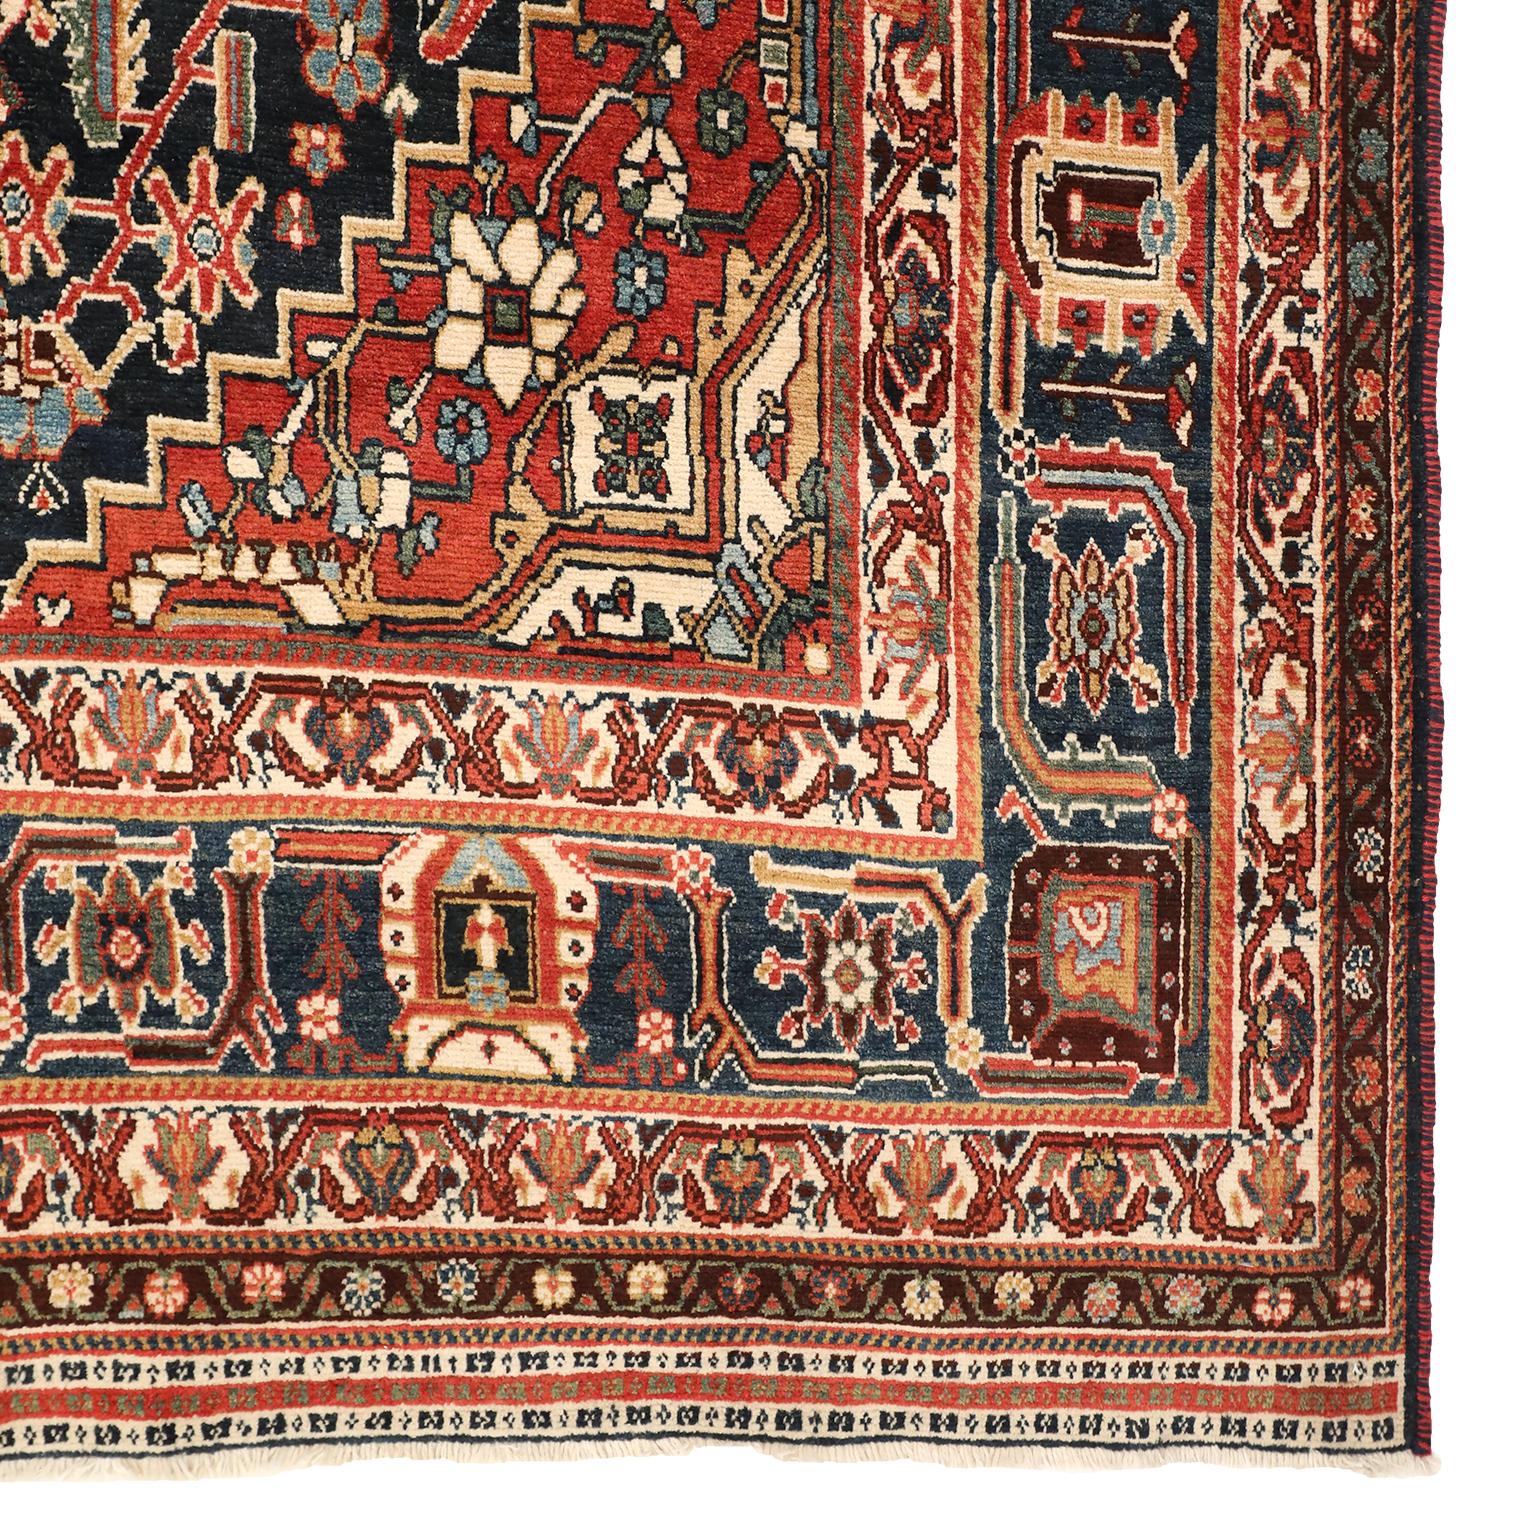 Vegetable Dyed Antique 1920s Qashqai Persian Rug, 11' x 17' For Sale